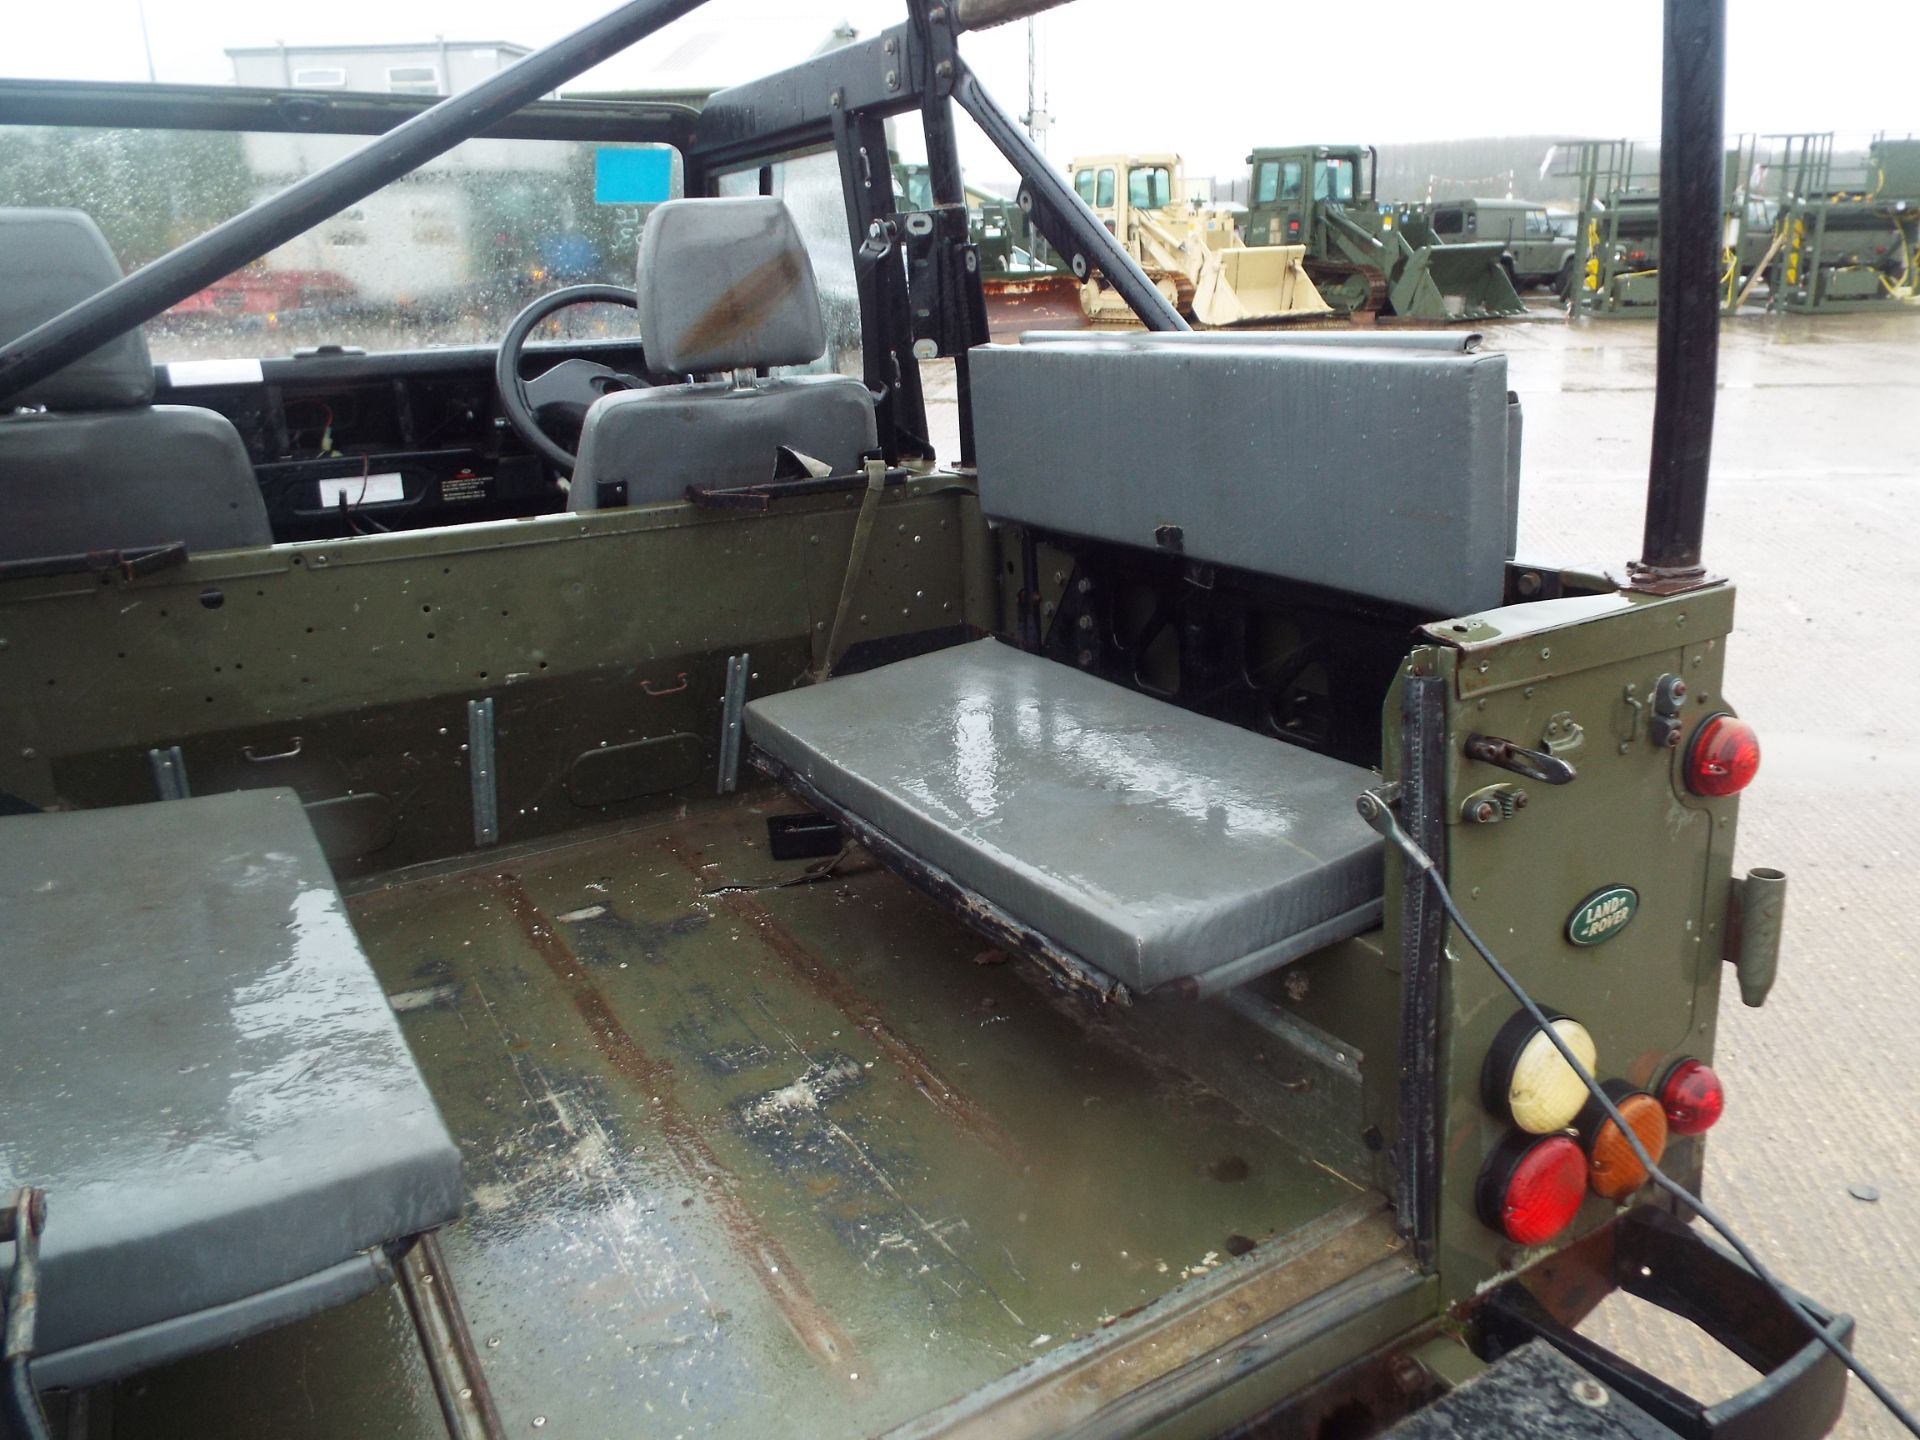 Military Specification Land Rover Wolf 90 Soft Top - Image 19 of 24